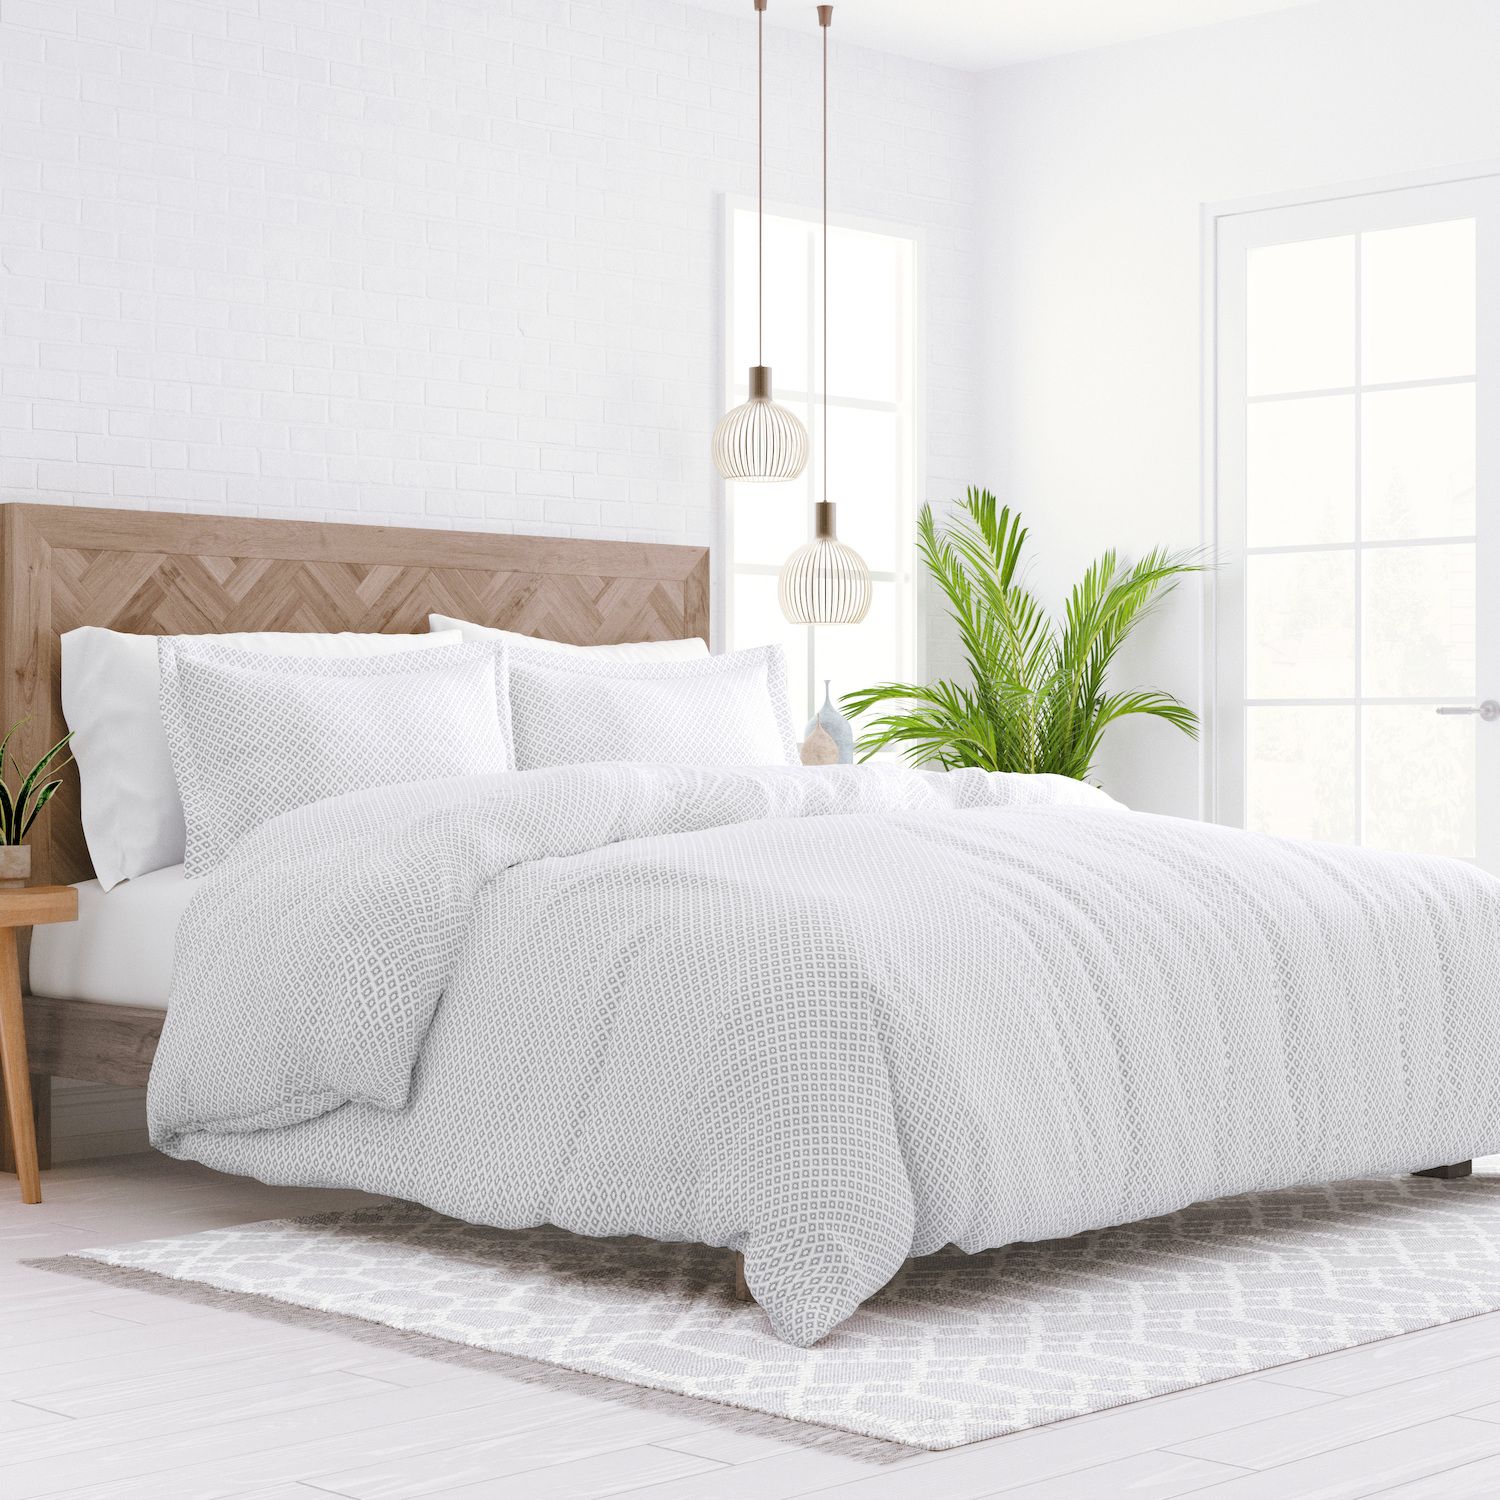 Image for Home Collection Premium Ultra Soft Polaris Pattern Duvet Cover Set at Kohl's.